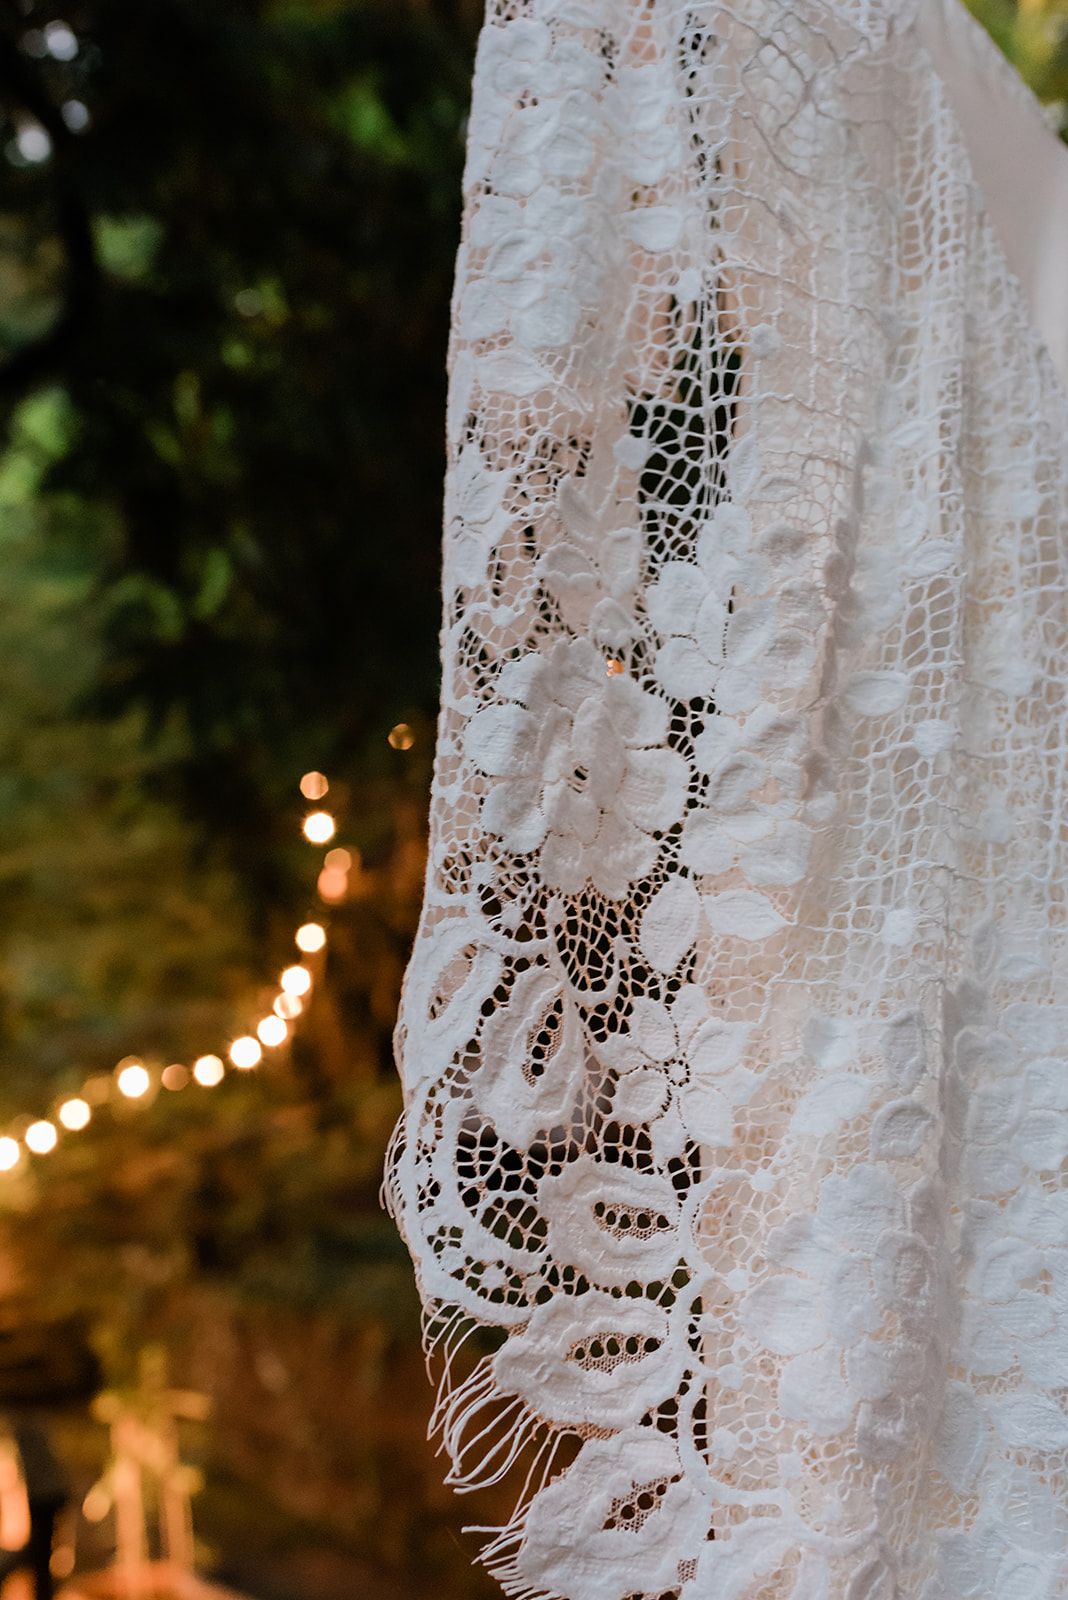 This is a picture of a close-up of a wedding dress.